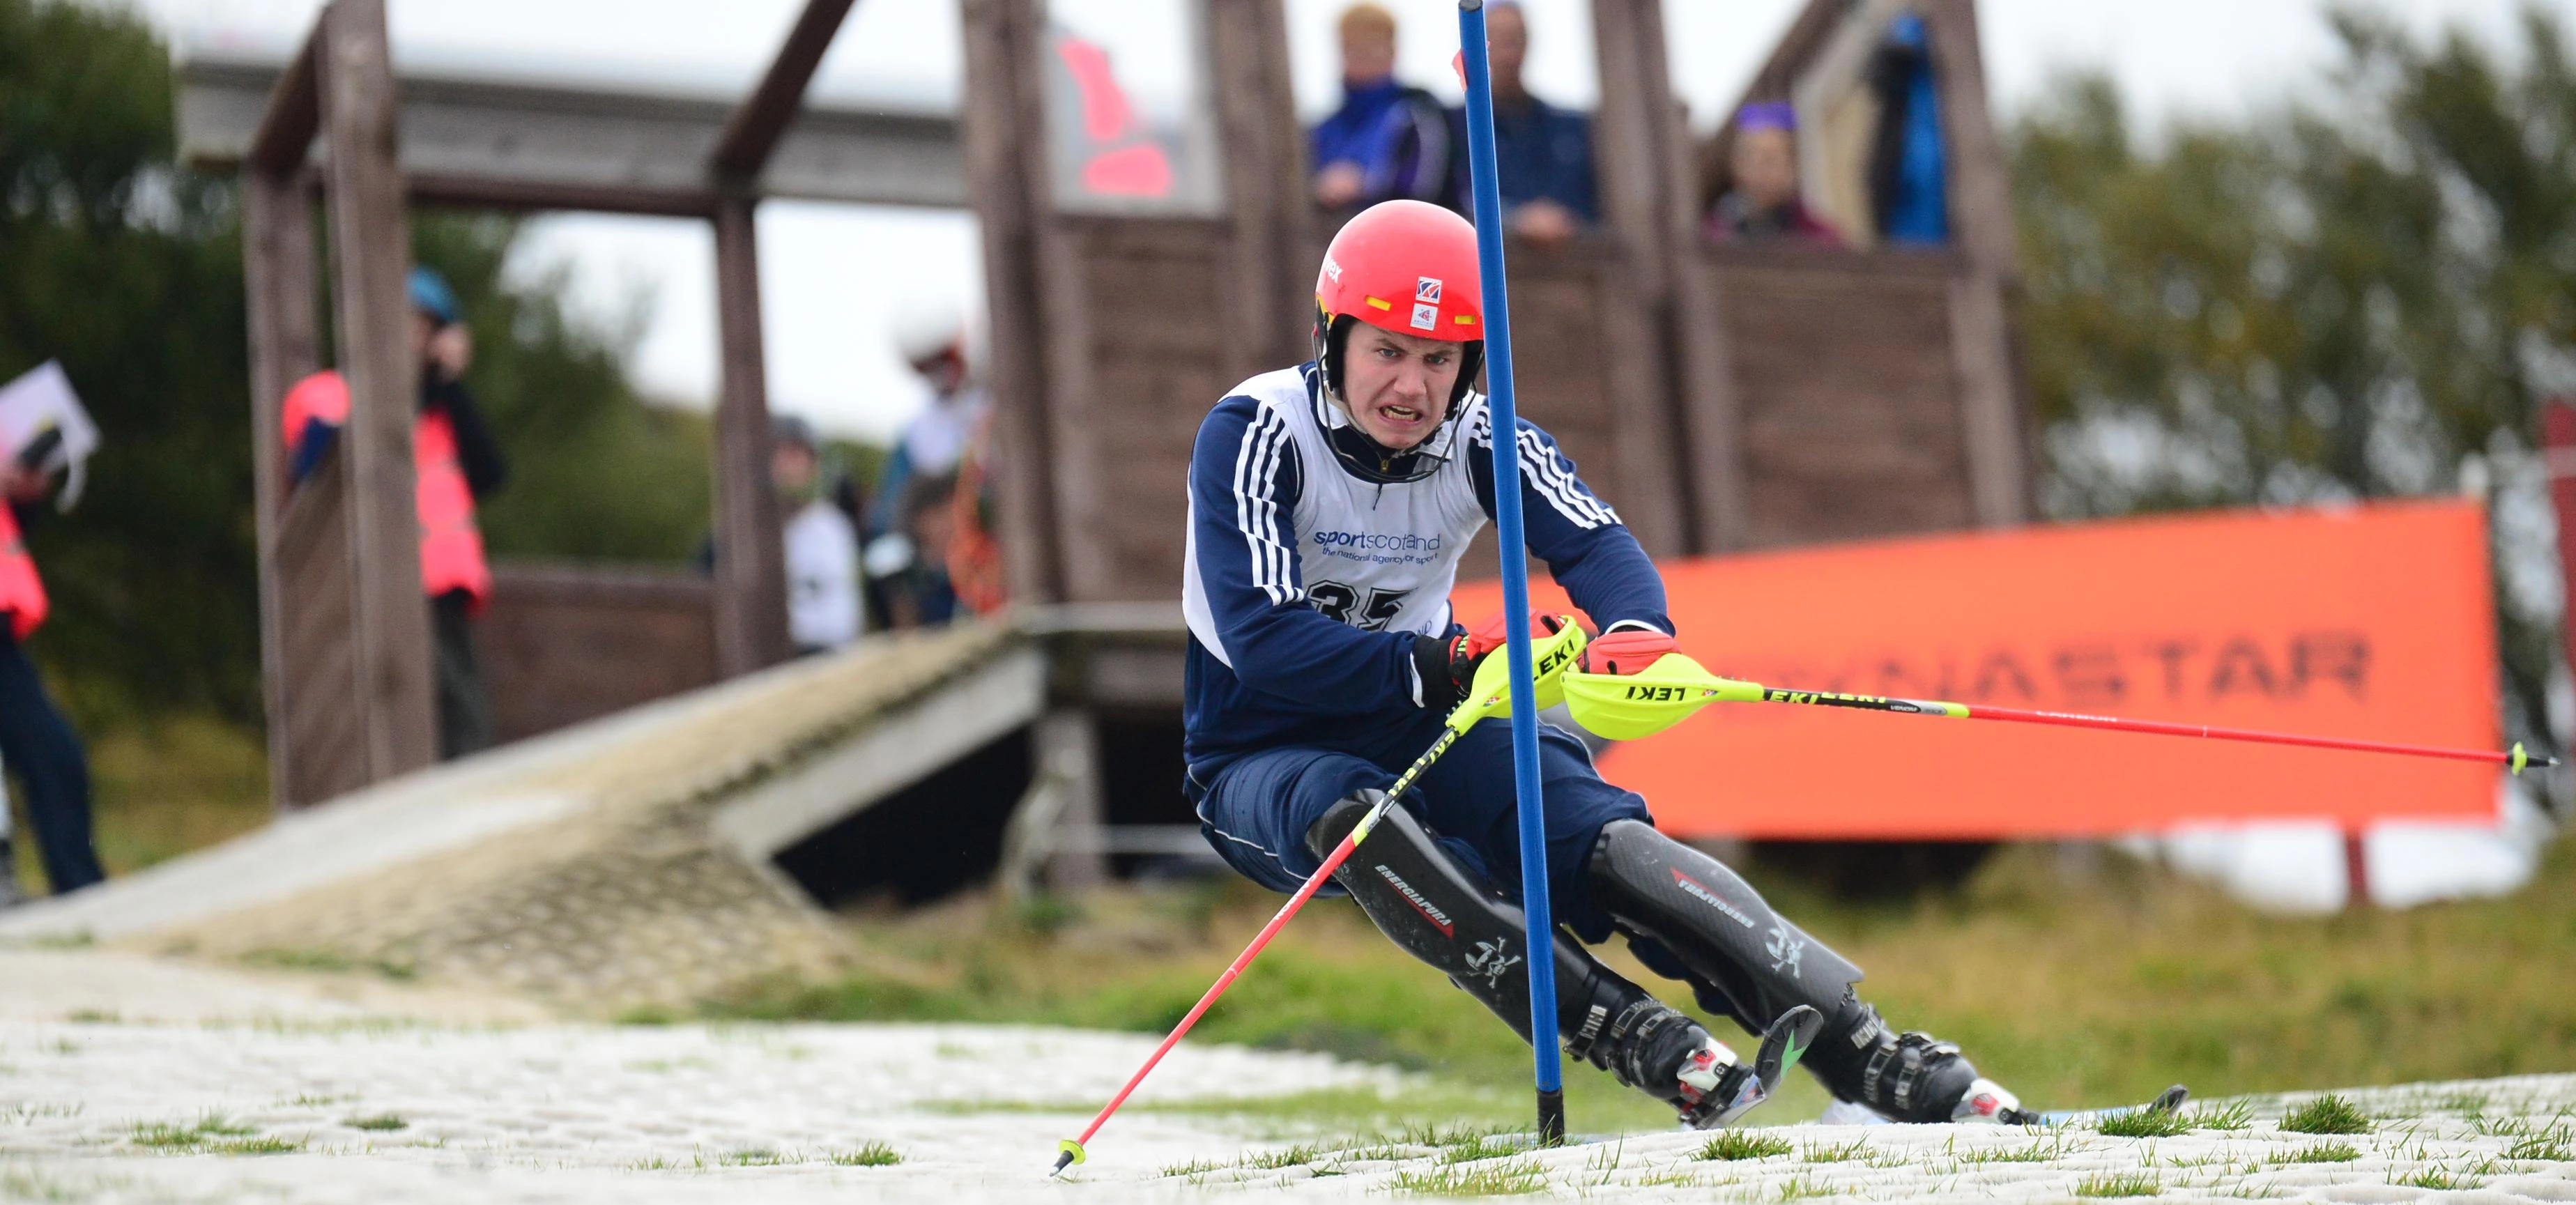 Euan Kick, male winner of the U21 and the Overall category in both slalom and giant slalom disciplin